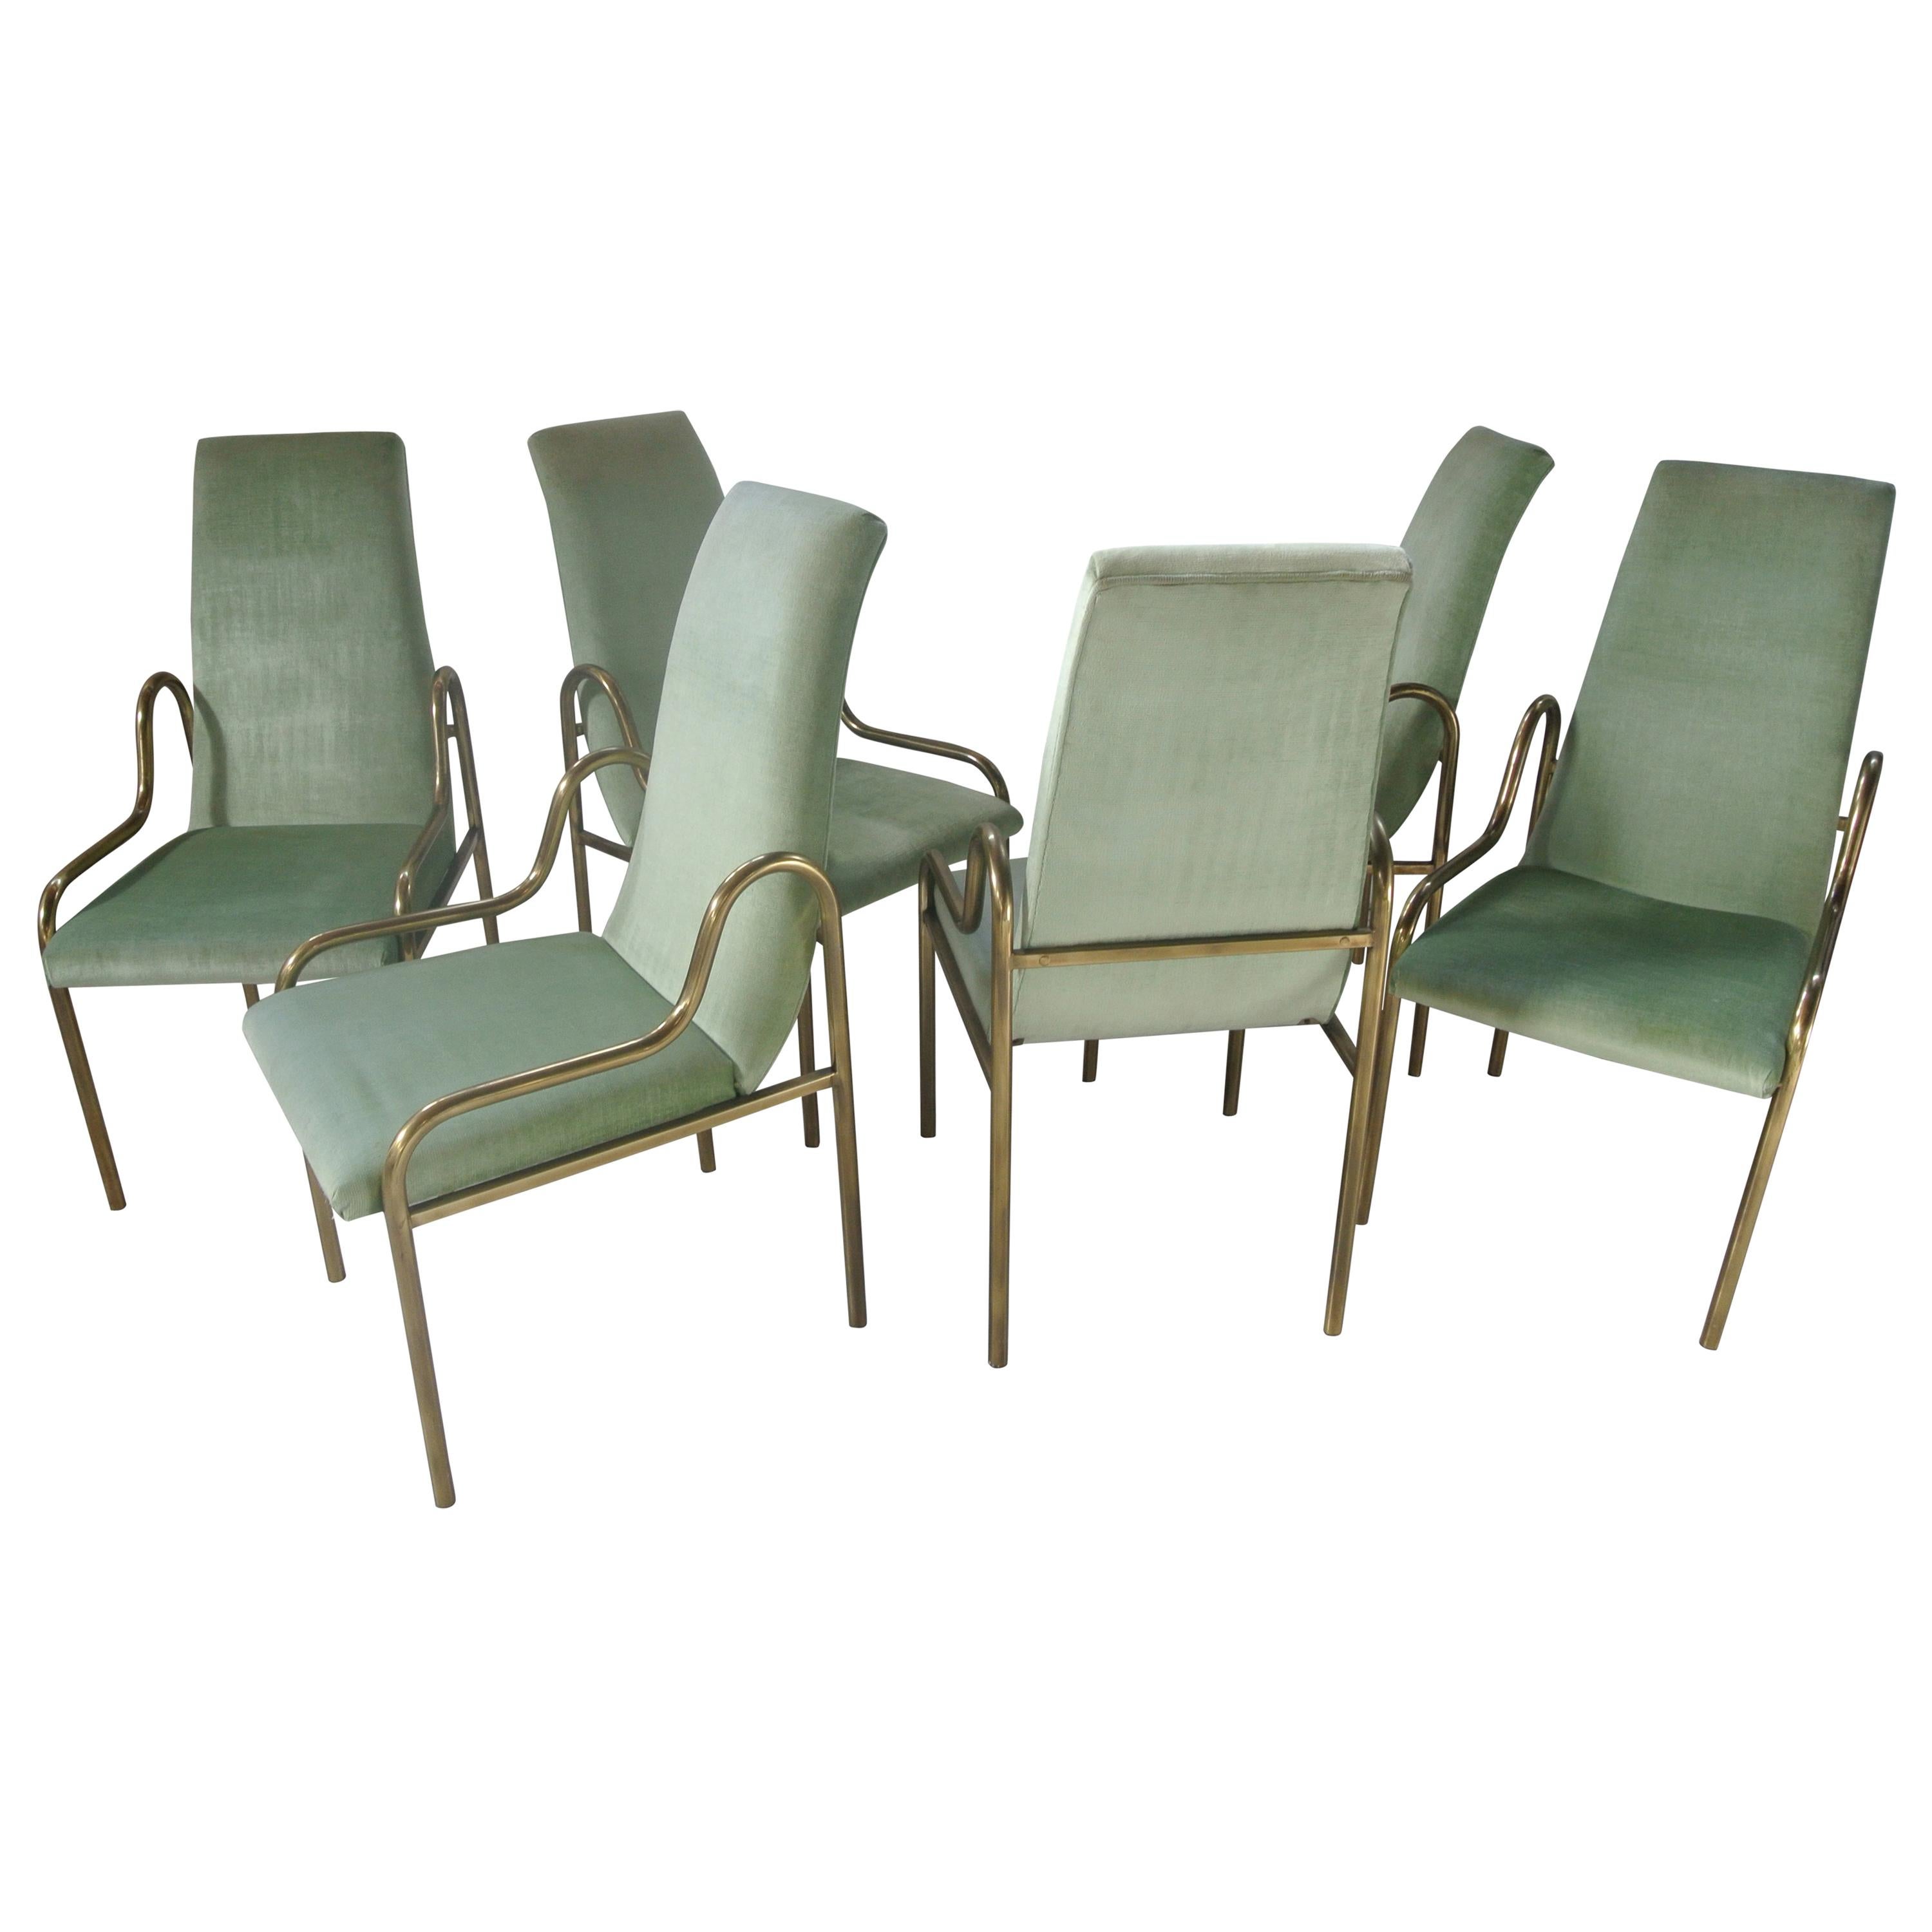 Set of Brass Dining Chairs by Mastercraft For Sale